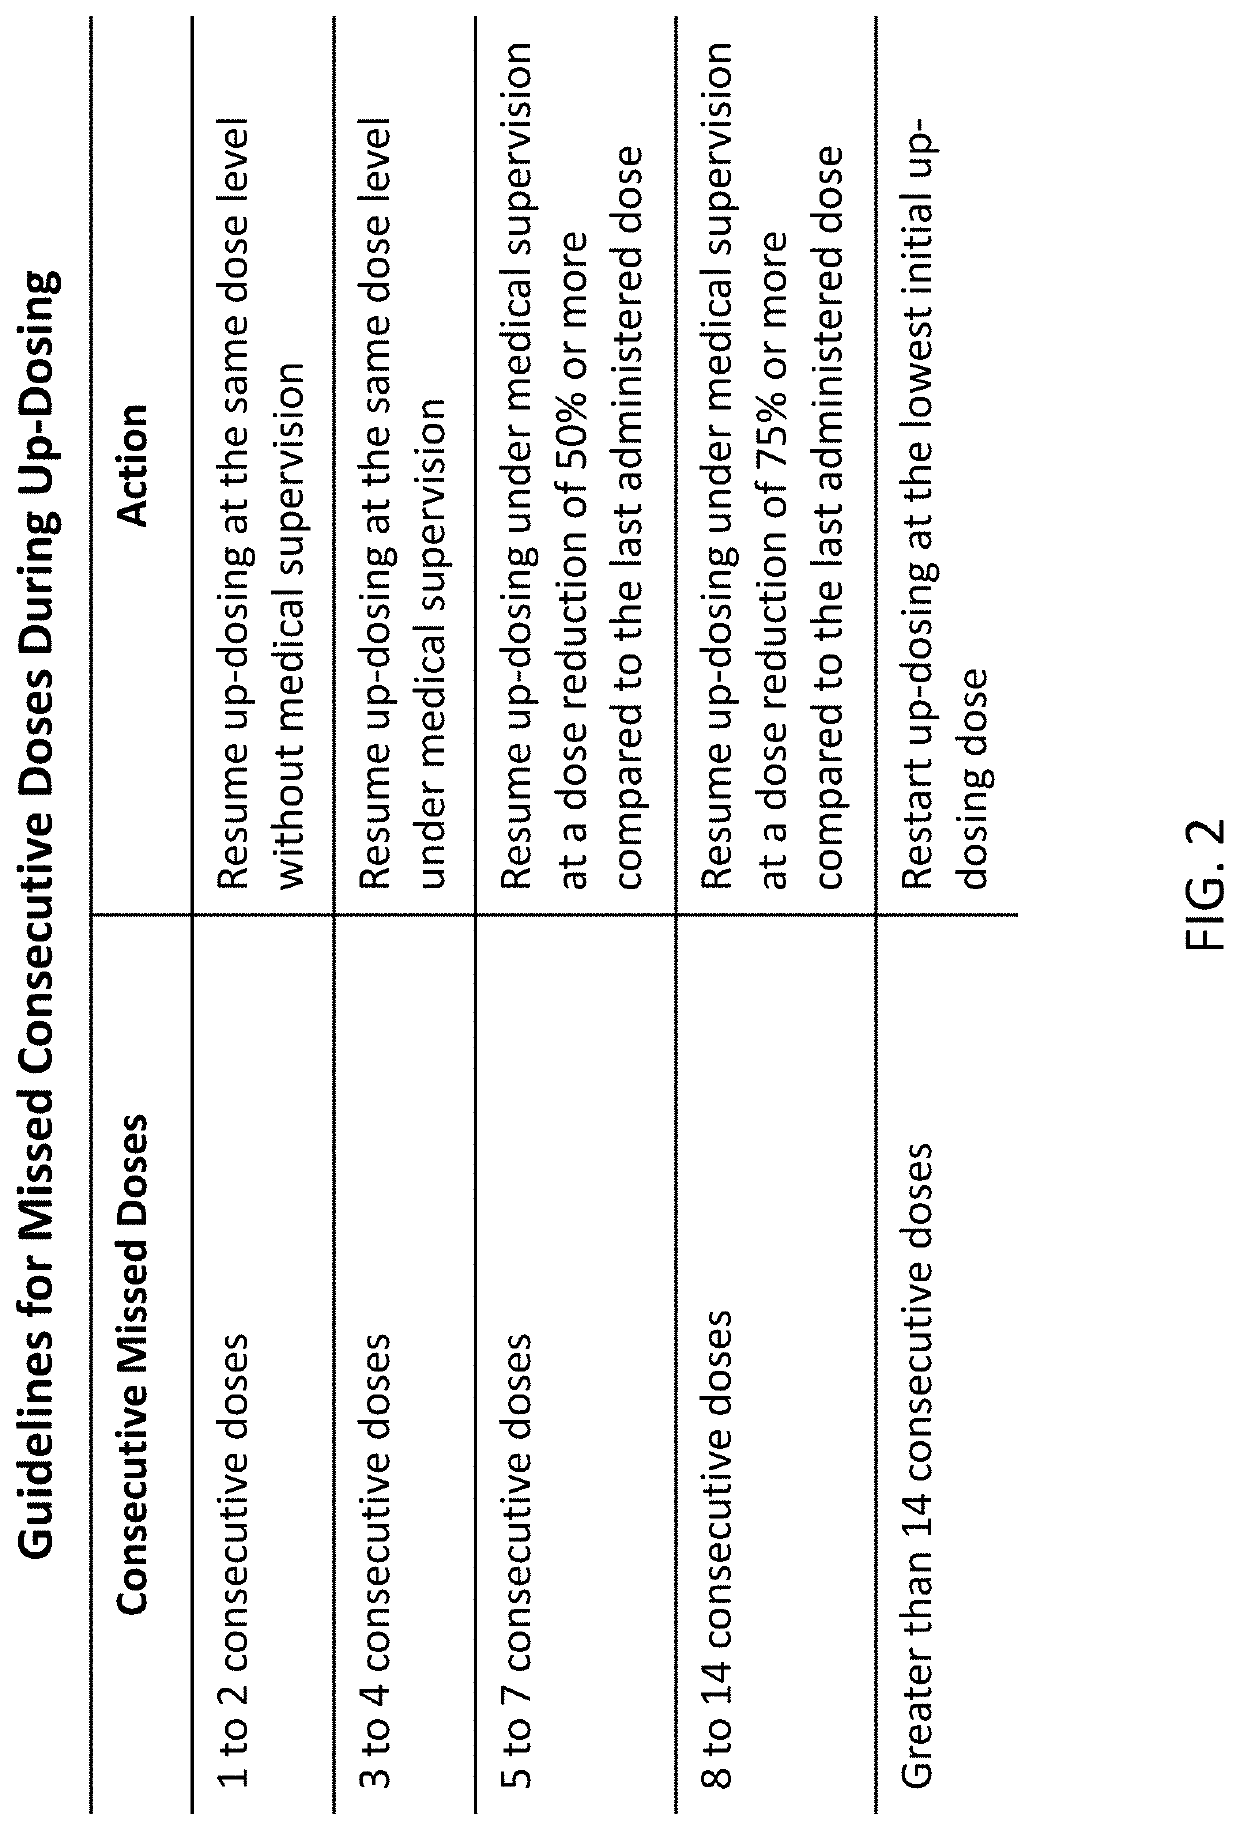 Peanut oral immunotherapy dosing schedule for missed doses